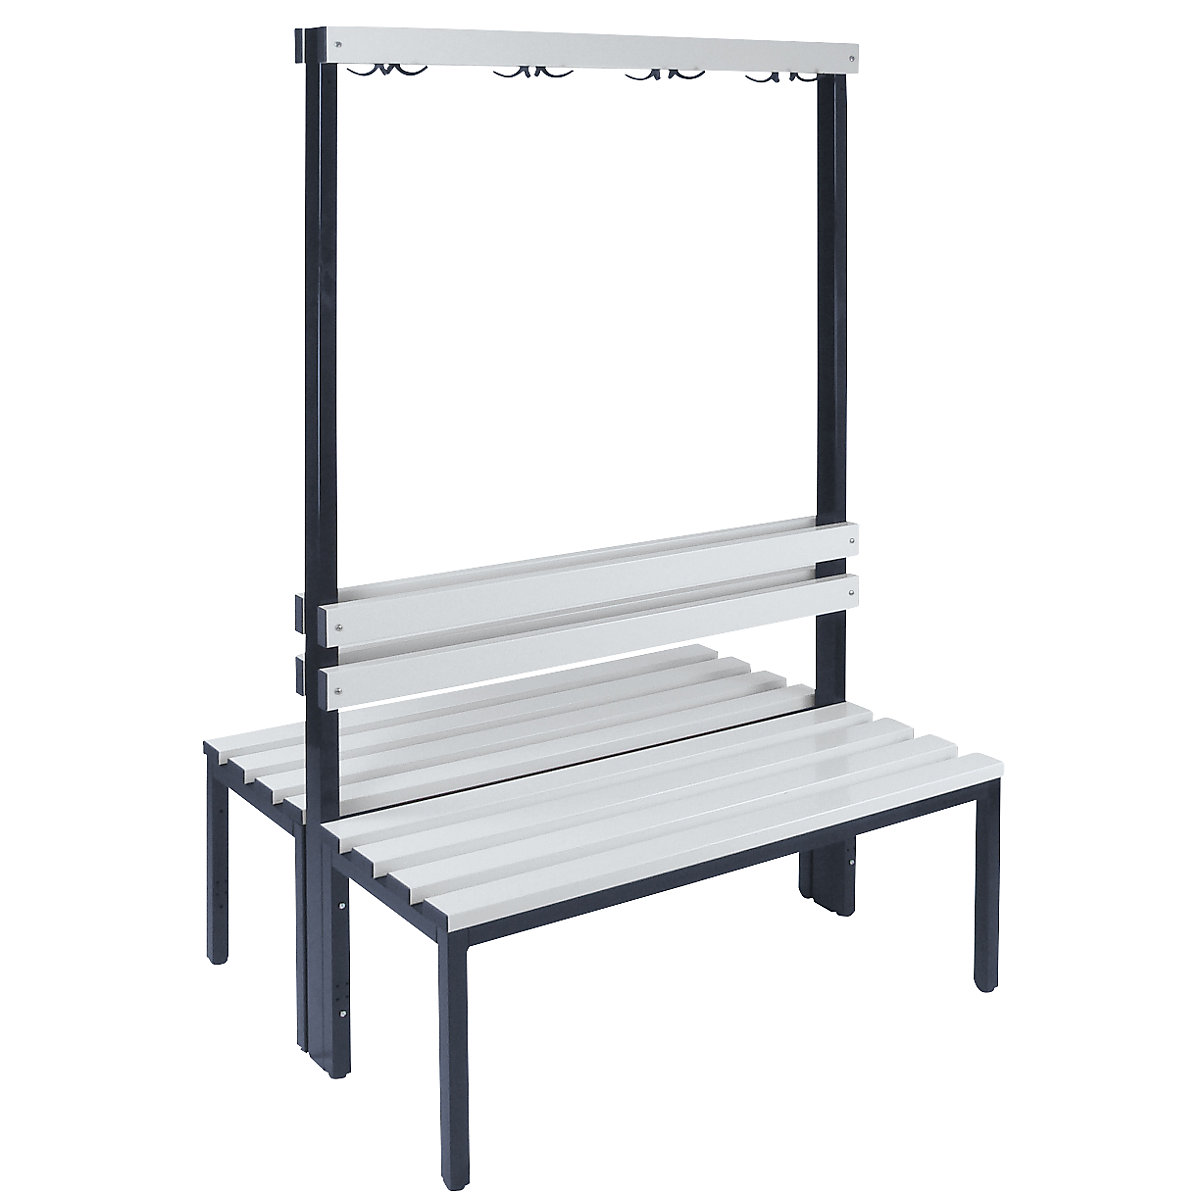 Wolf – Cloakroom bench, double sided, length 1000 mm, PVC slats, 2x 4 double-prong hooks, grey